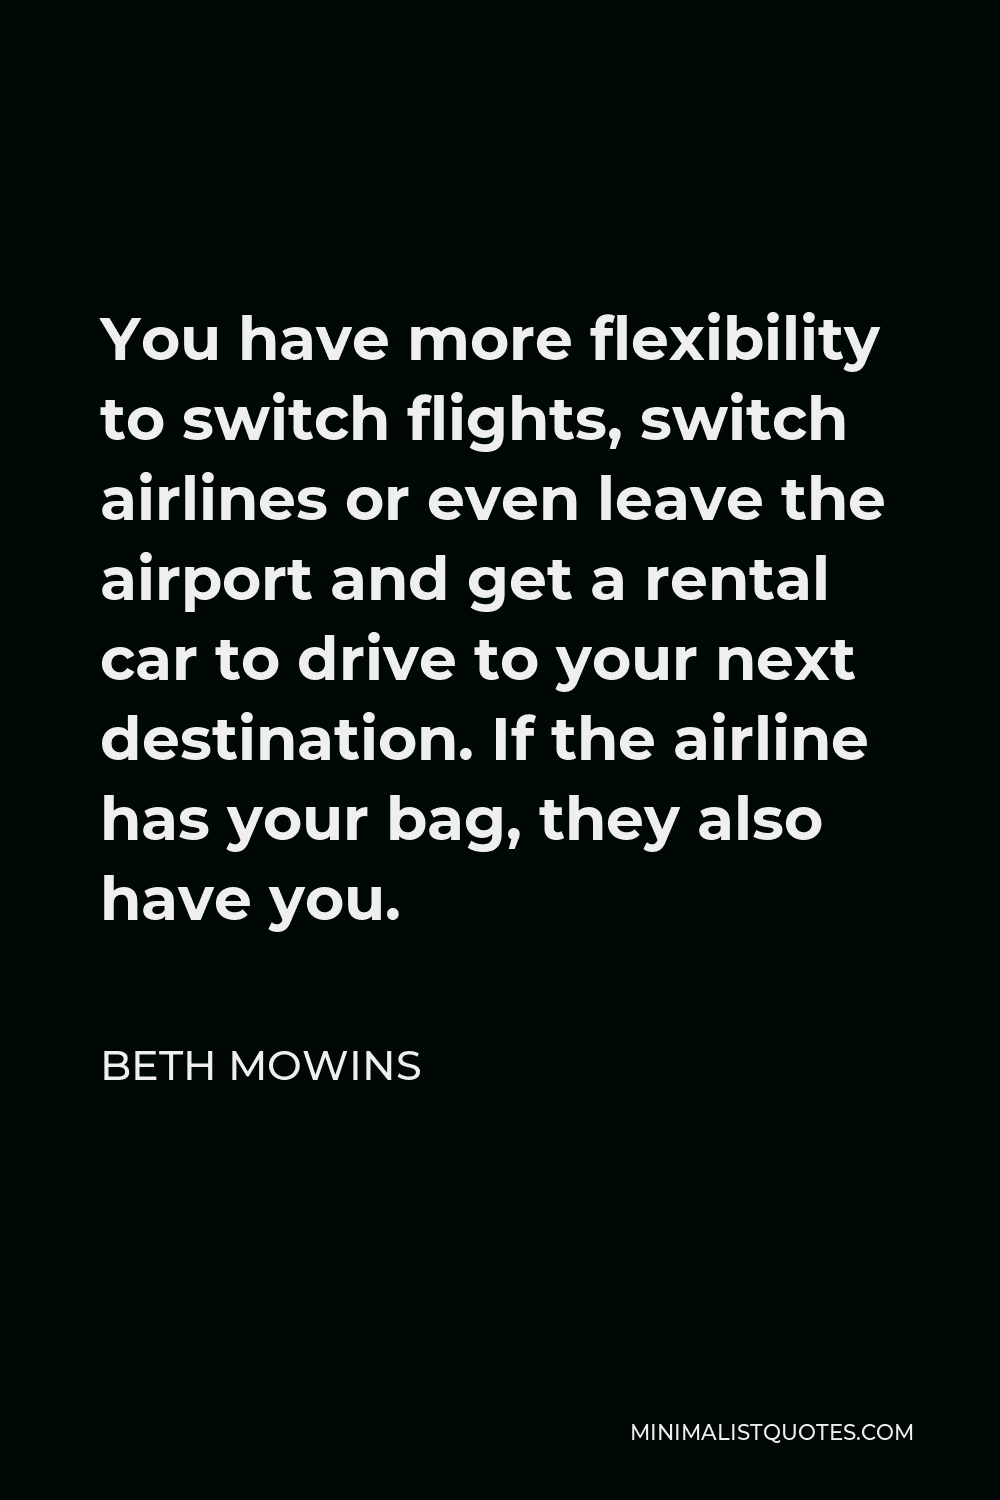 Beth Mowins Quote - You have more flexibility to switch flights, switch airlines or even leave the airport and get a rental car to drive to your next destination. If the airline has your bag, they also have you.